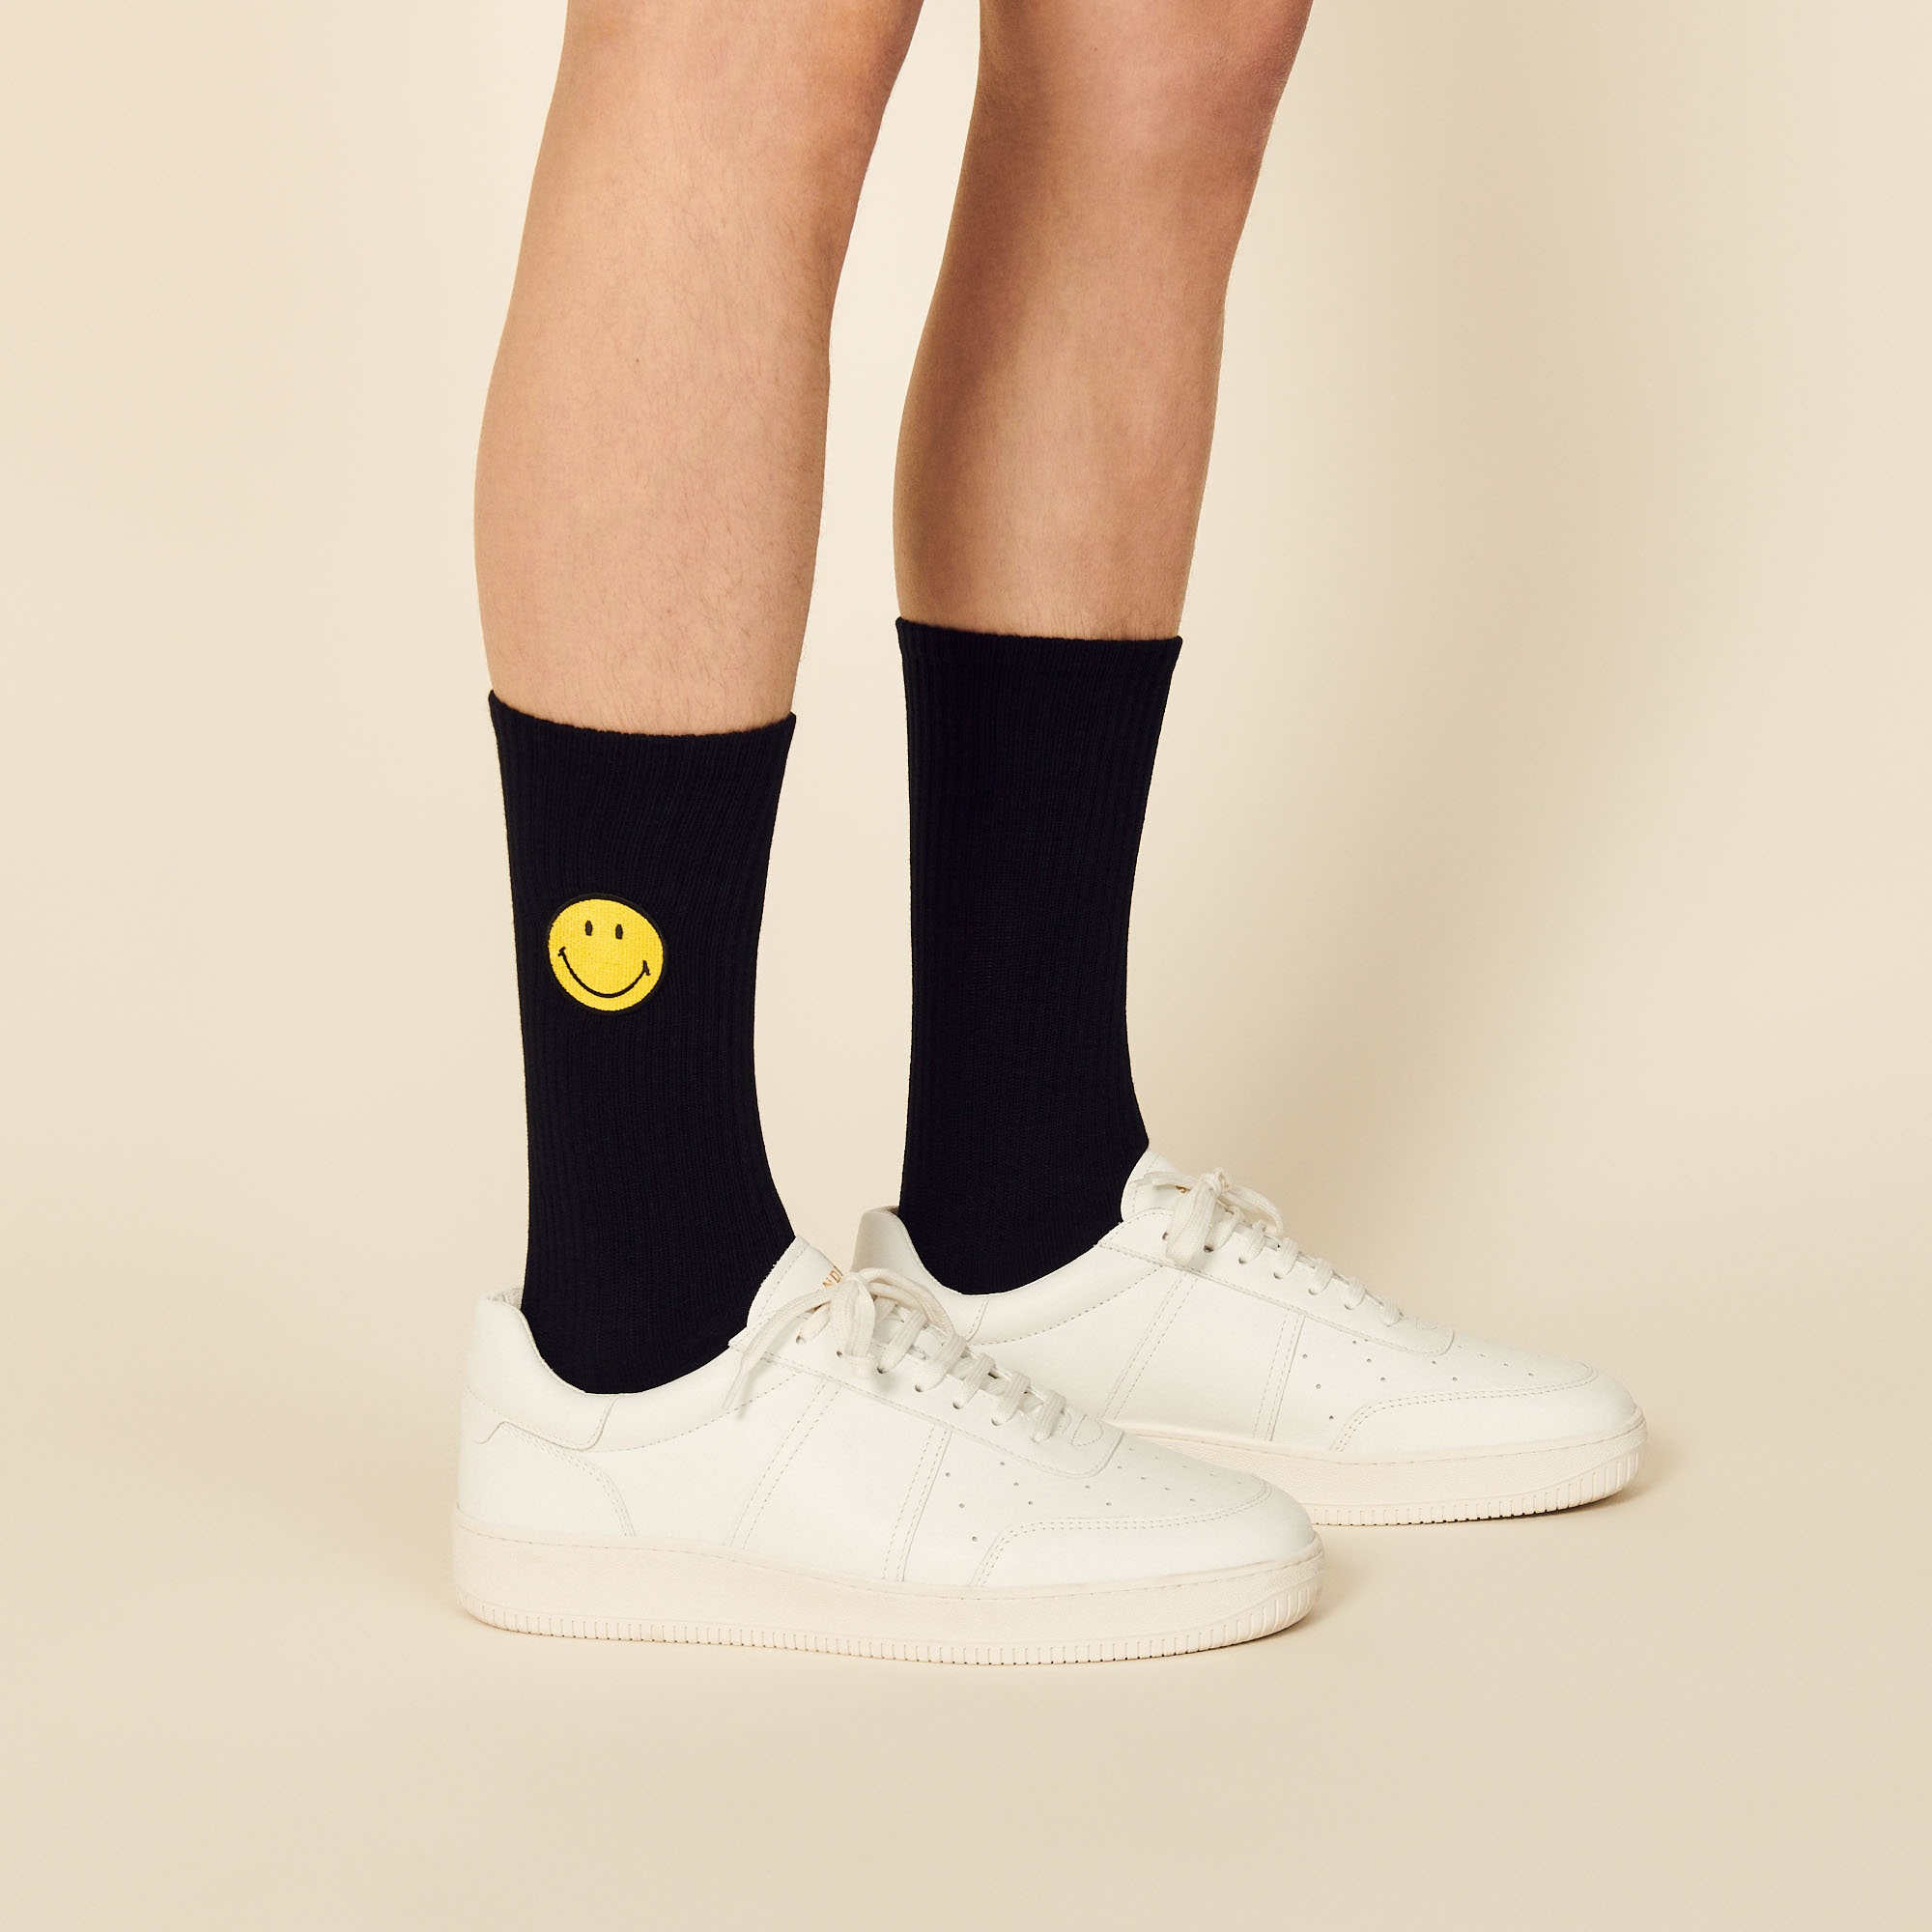 Smiley® Socks with patch - 2